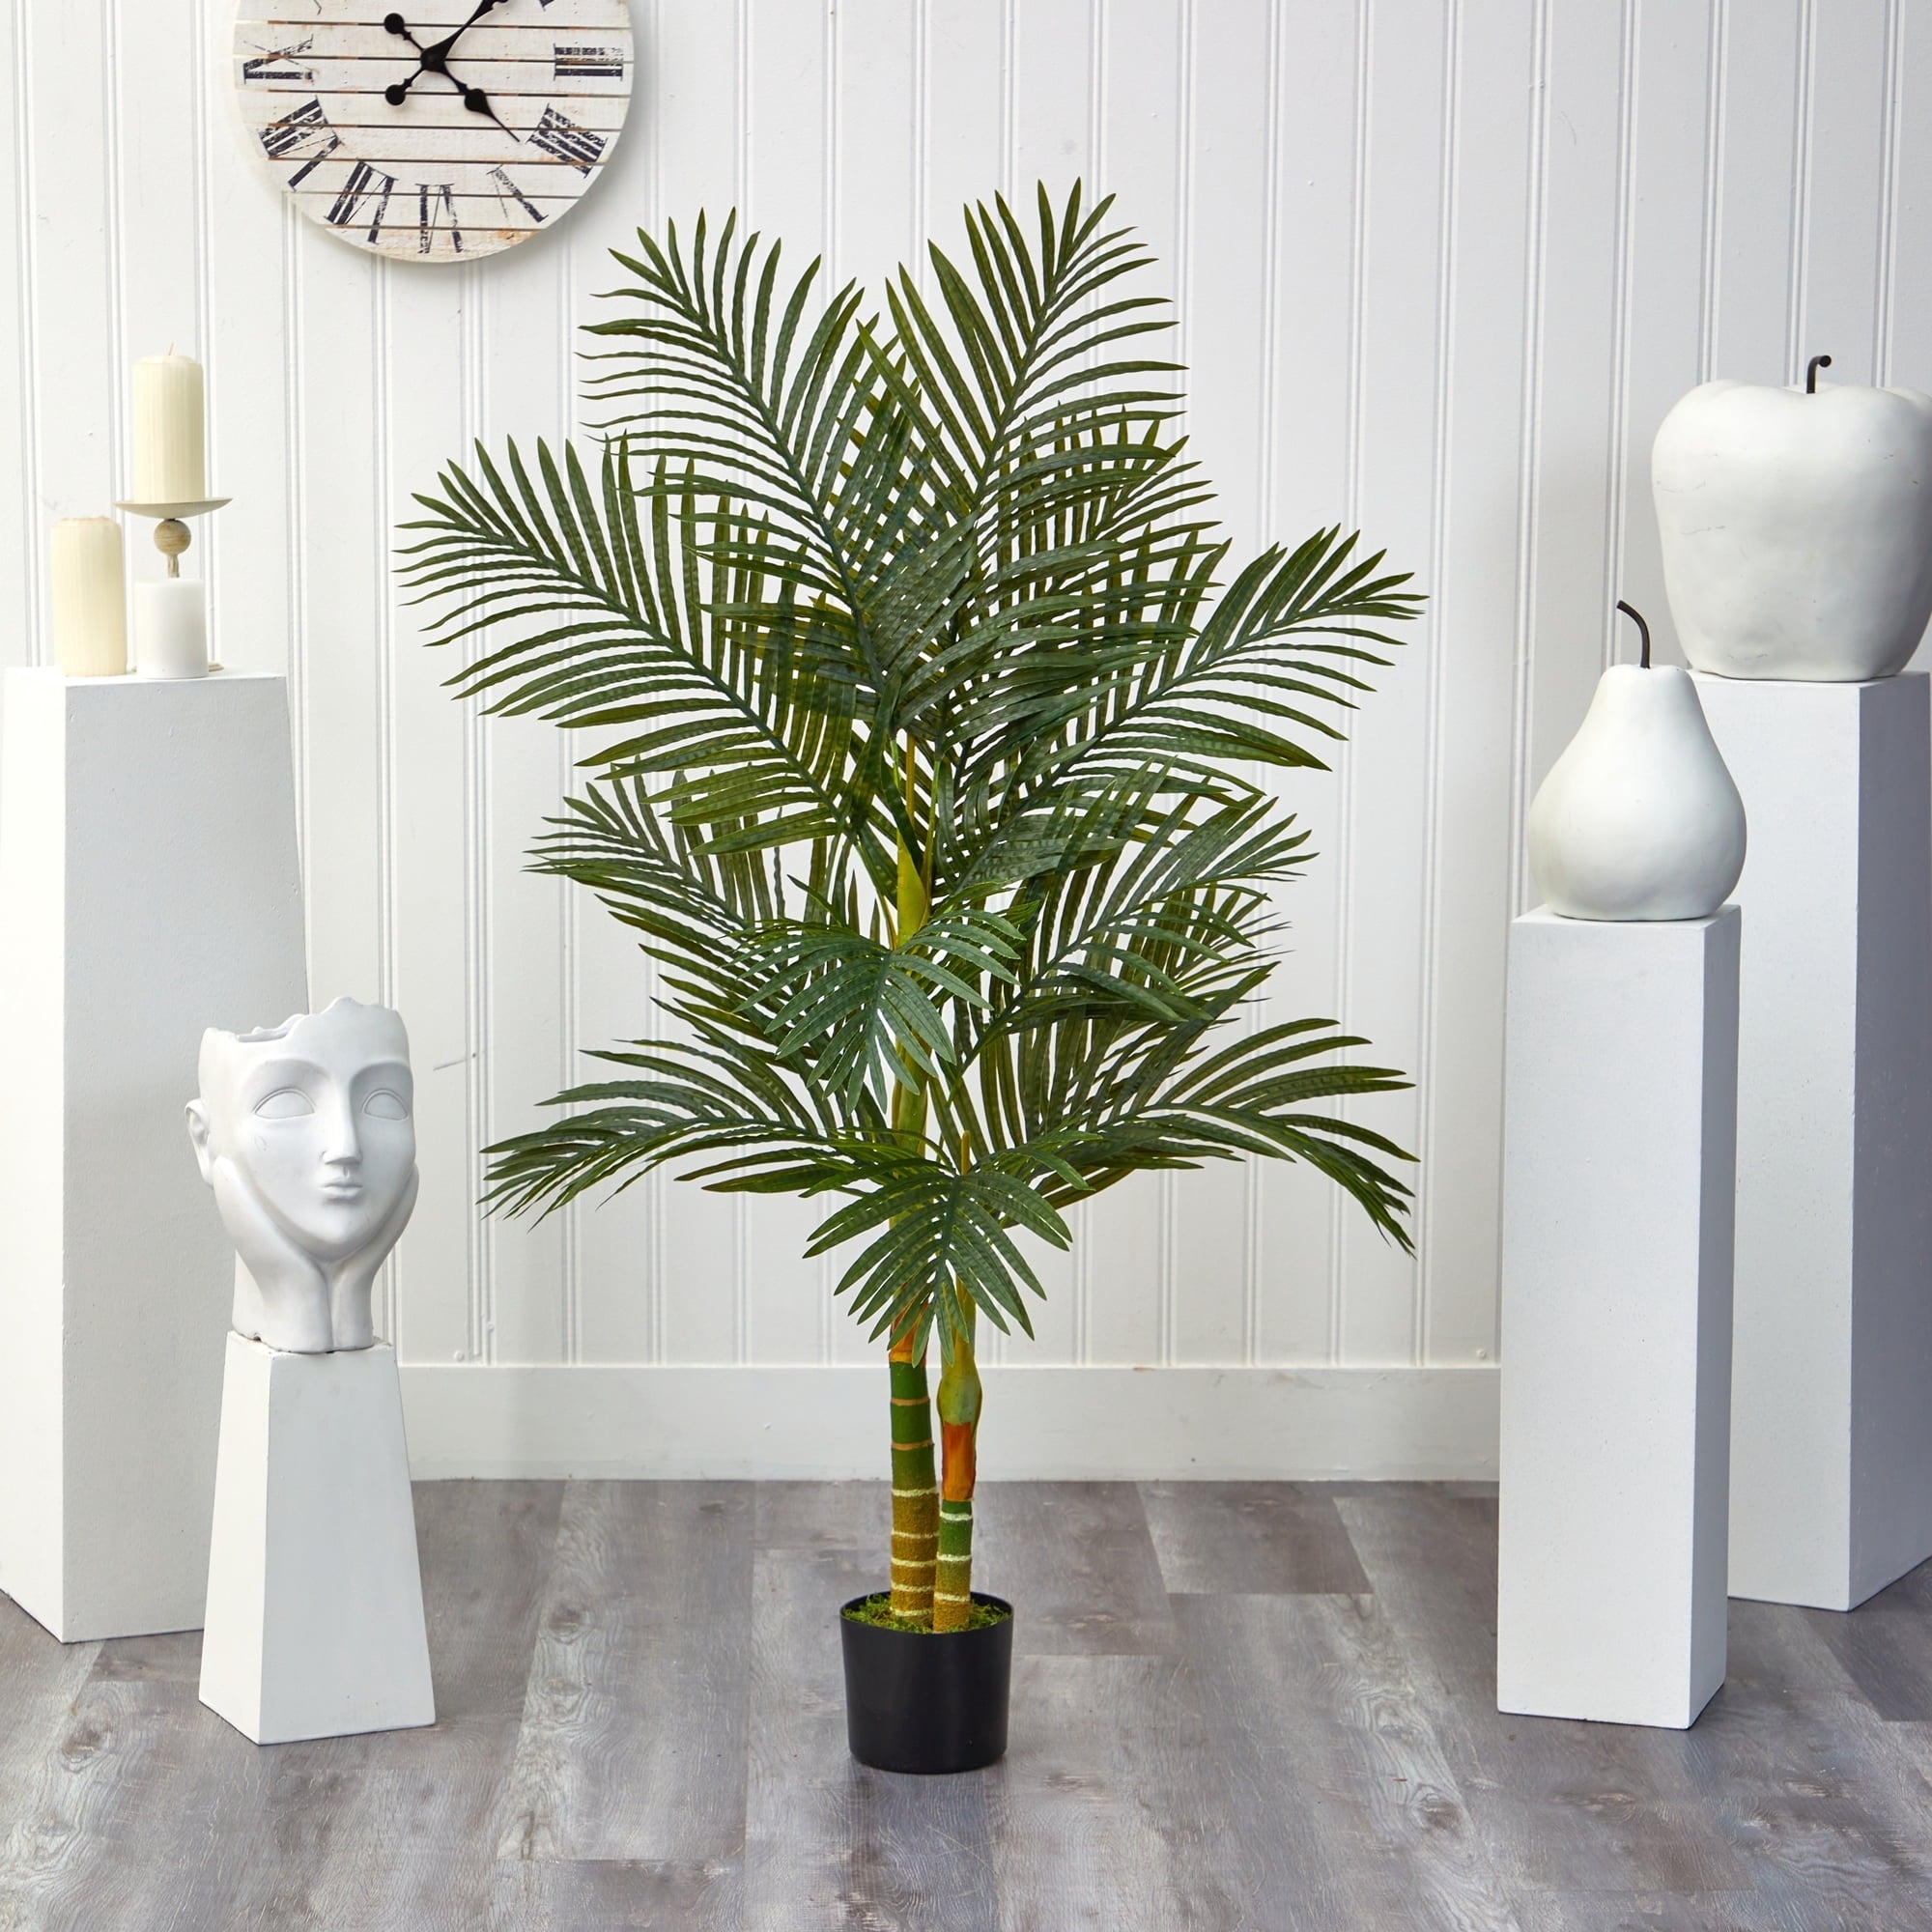 the artificial palm tree in a pot